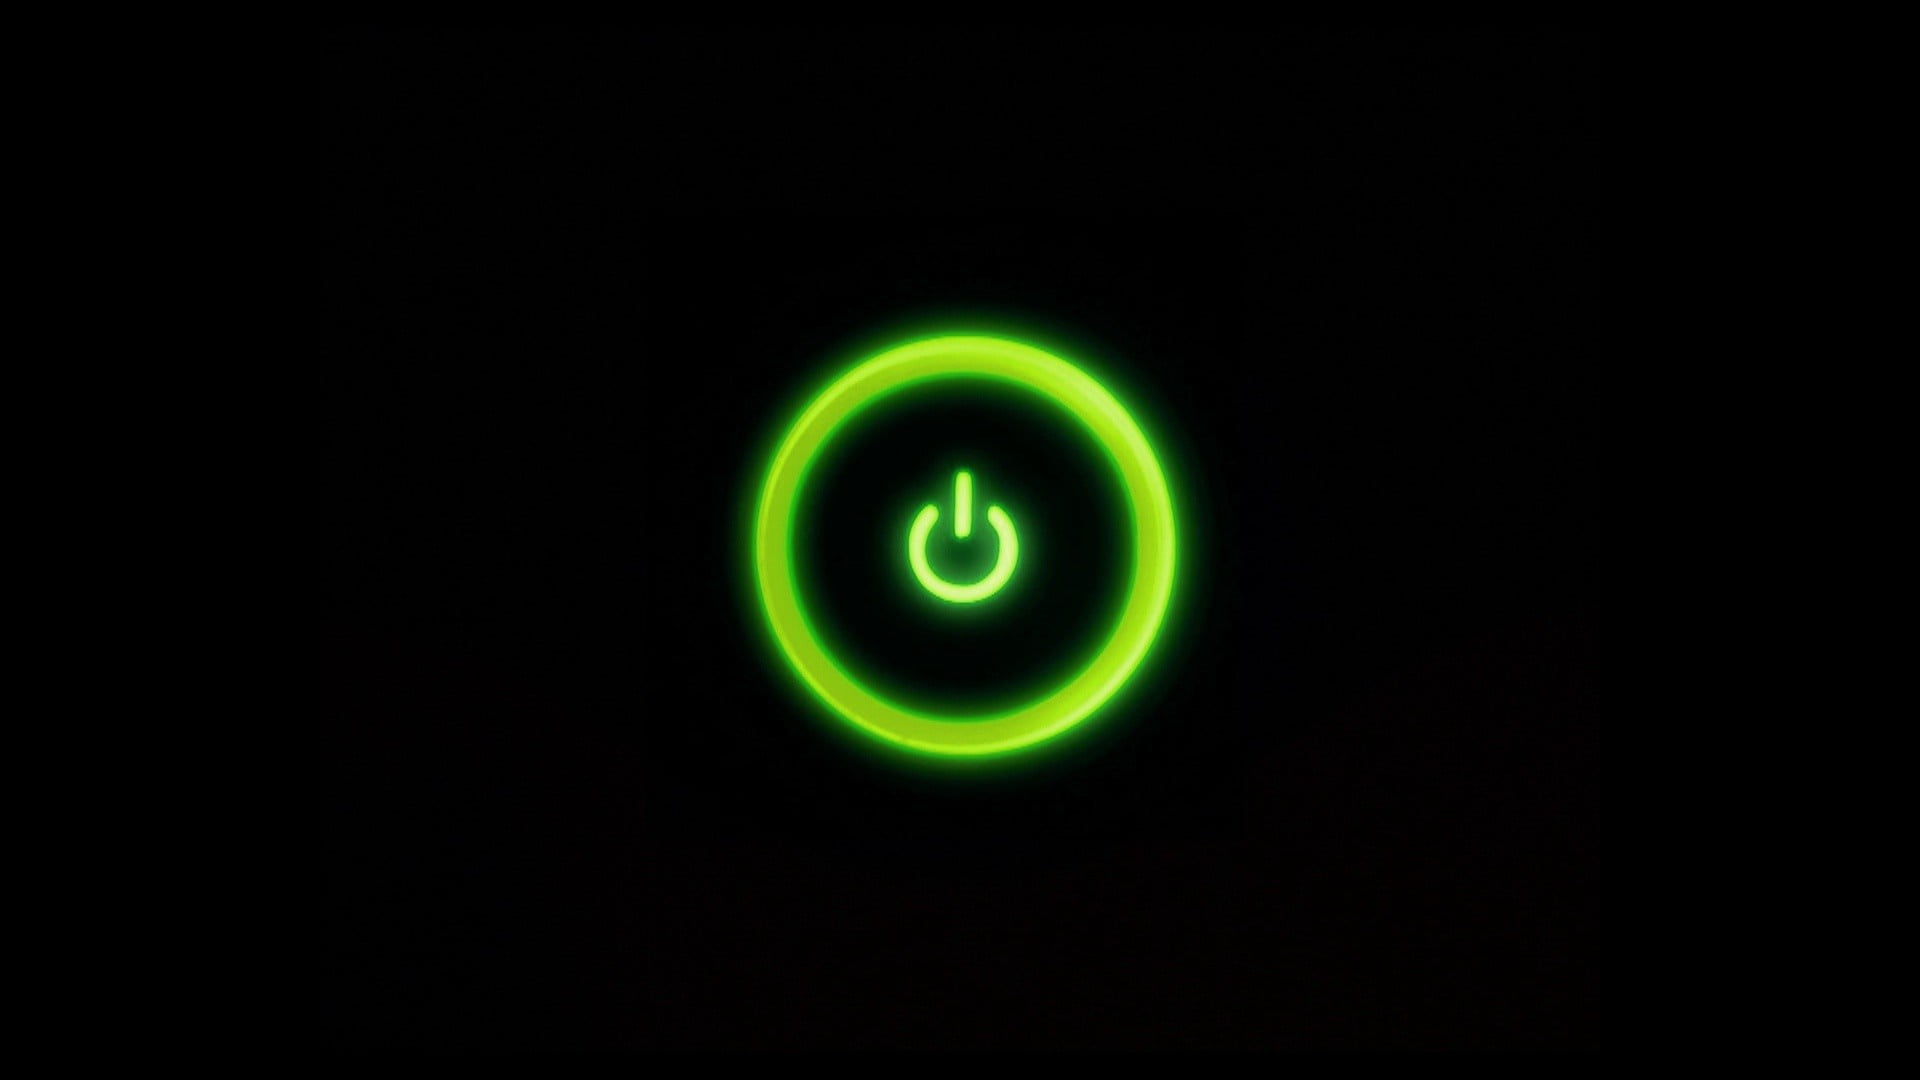 power button illustration, power buttons, simple background, minimalism